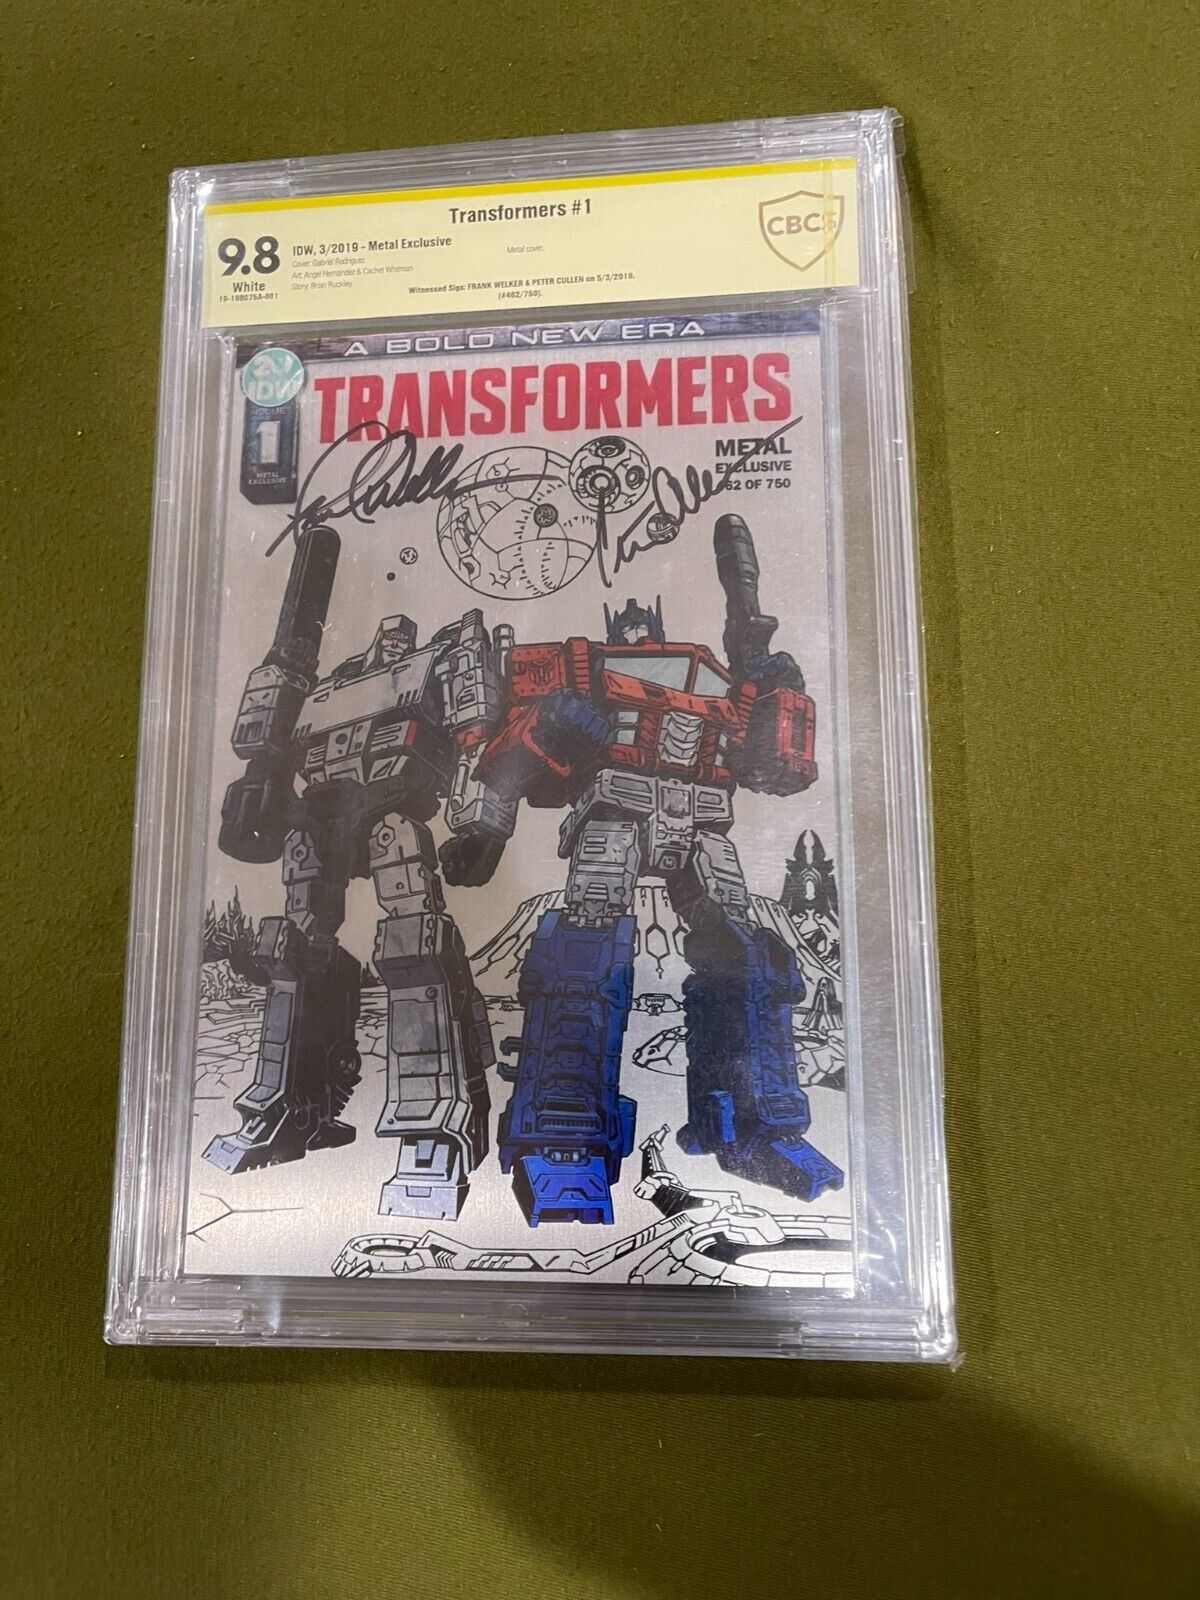 Signed Transformers #1 Metal Cover Edition Peter Cullen & Frank Welker CGC 9.8